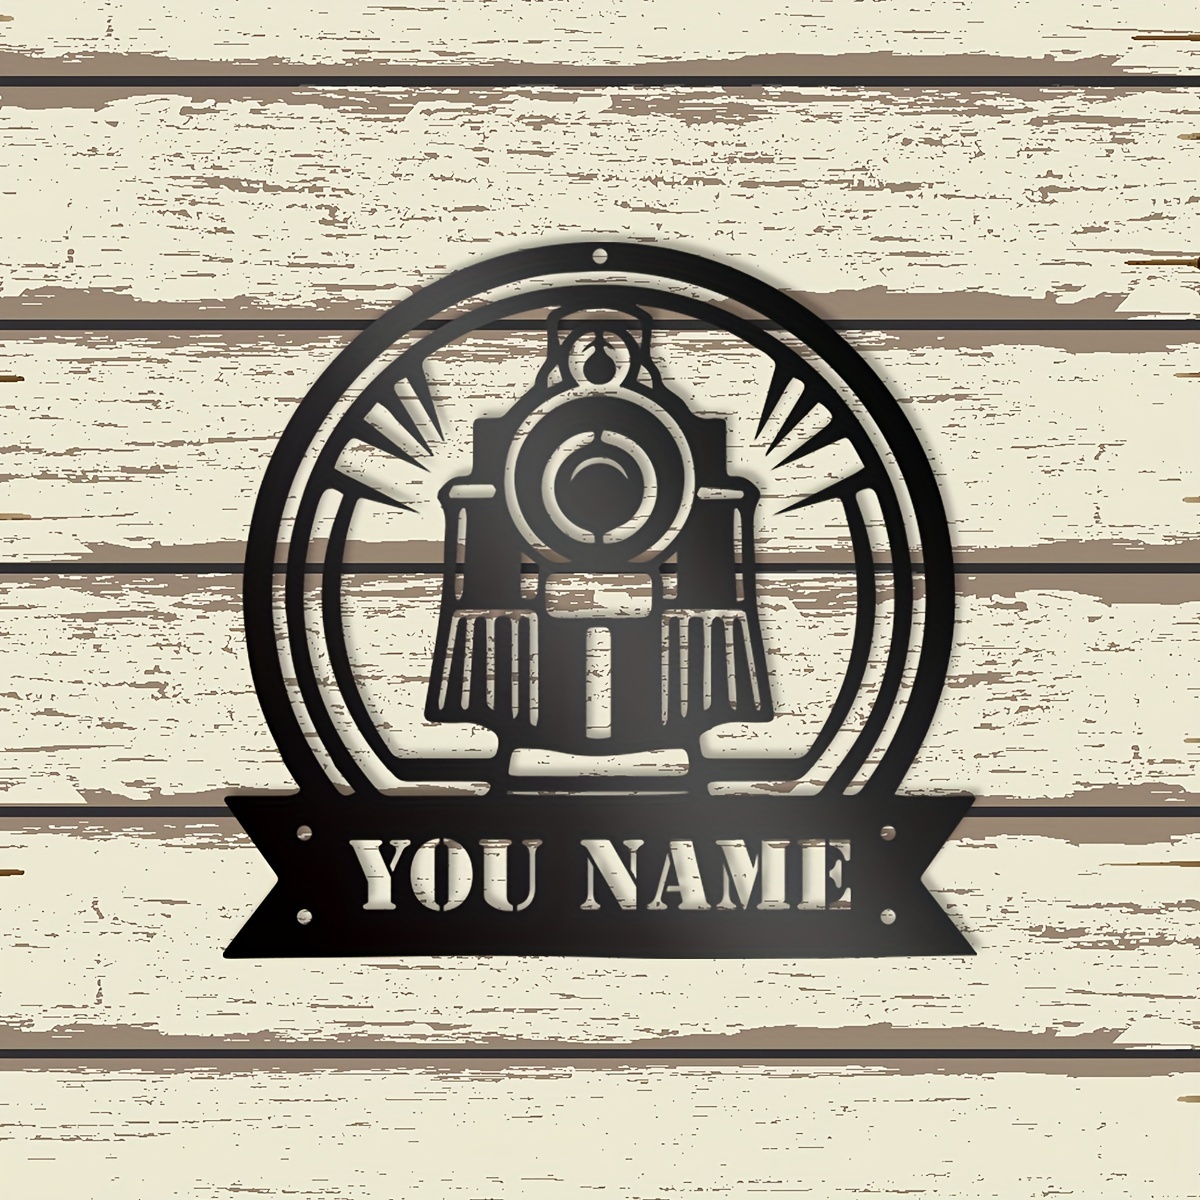 

1pc Customizable Train Metal Wall Art Sign With Personalized Family Name, Rustic Home Decor, Vintage Railway Locomotive Design, For House Front Door, Porch, Indoor Outdoor Use